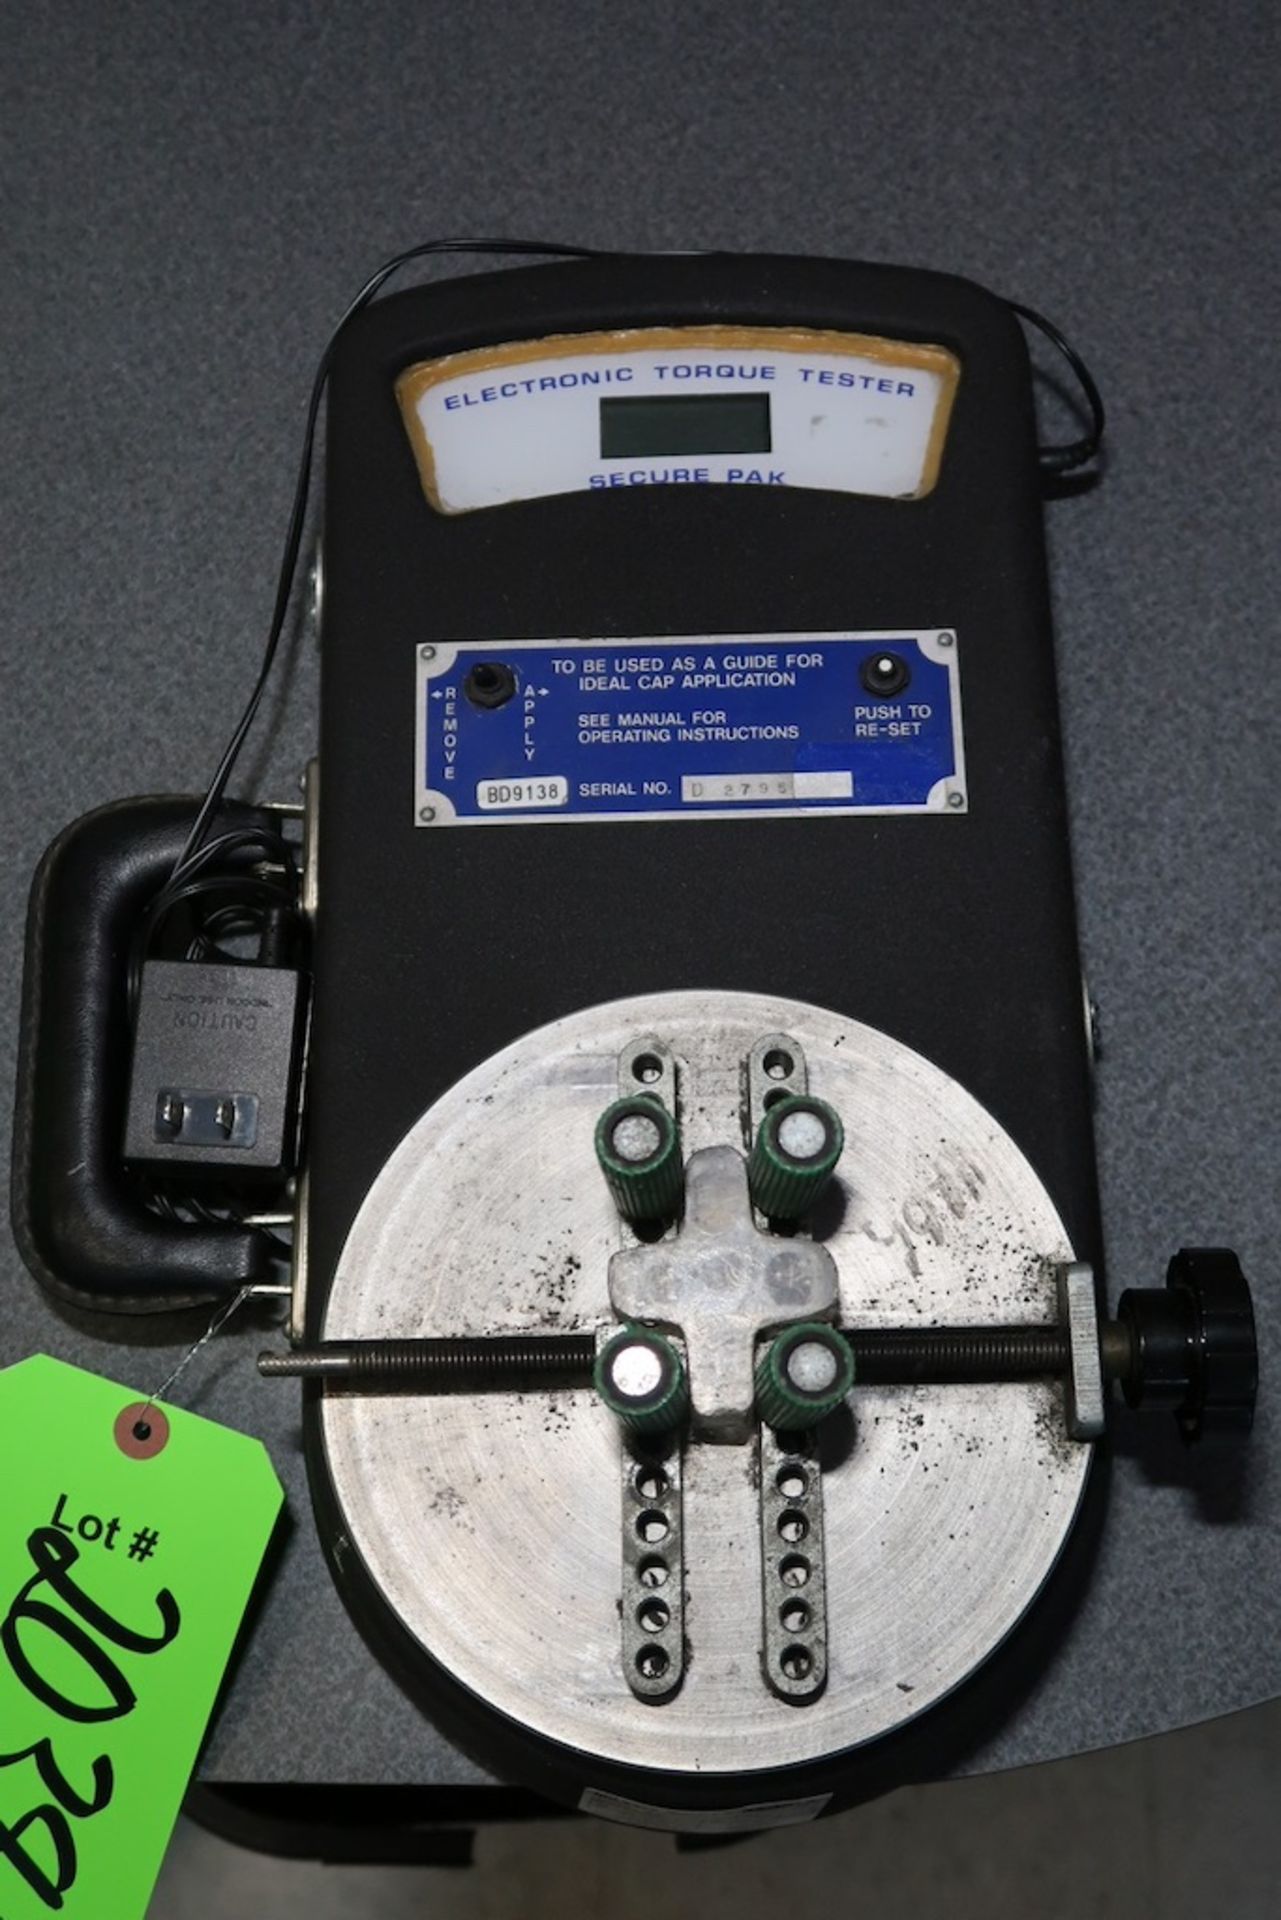 Secure Pak BD9138 Electronic Torque Tester - Image 2 of 2